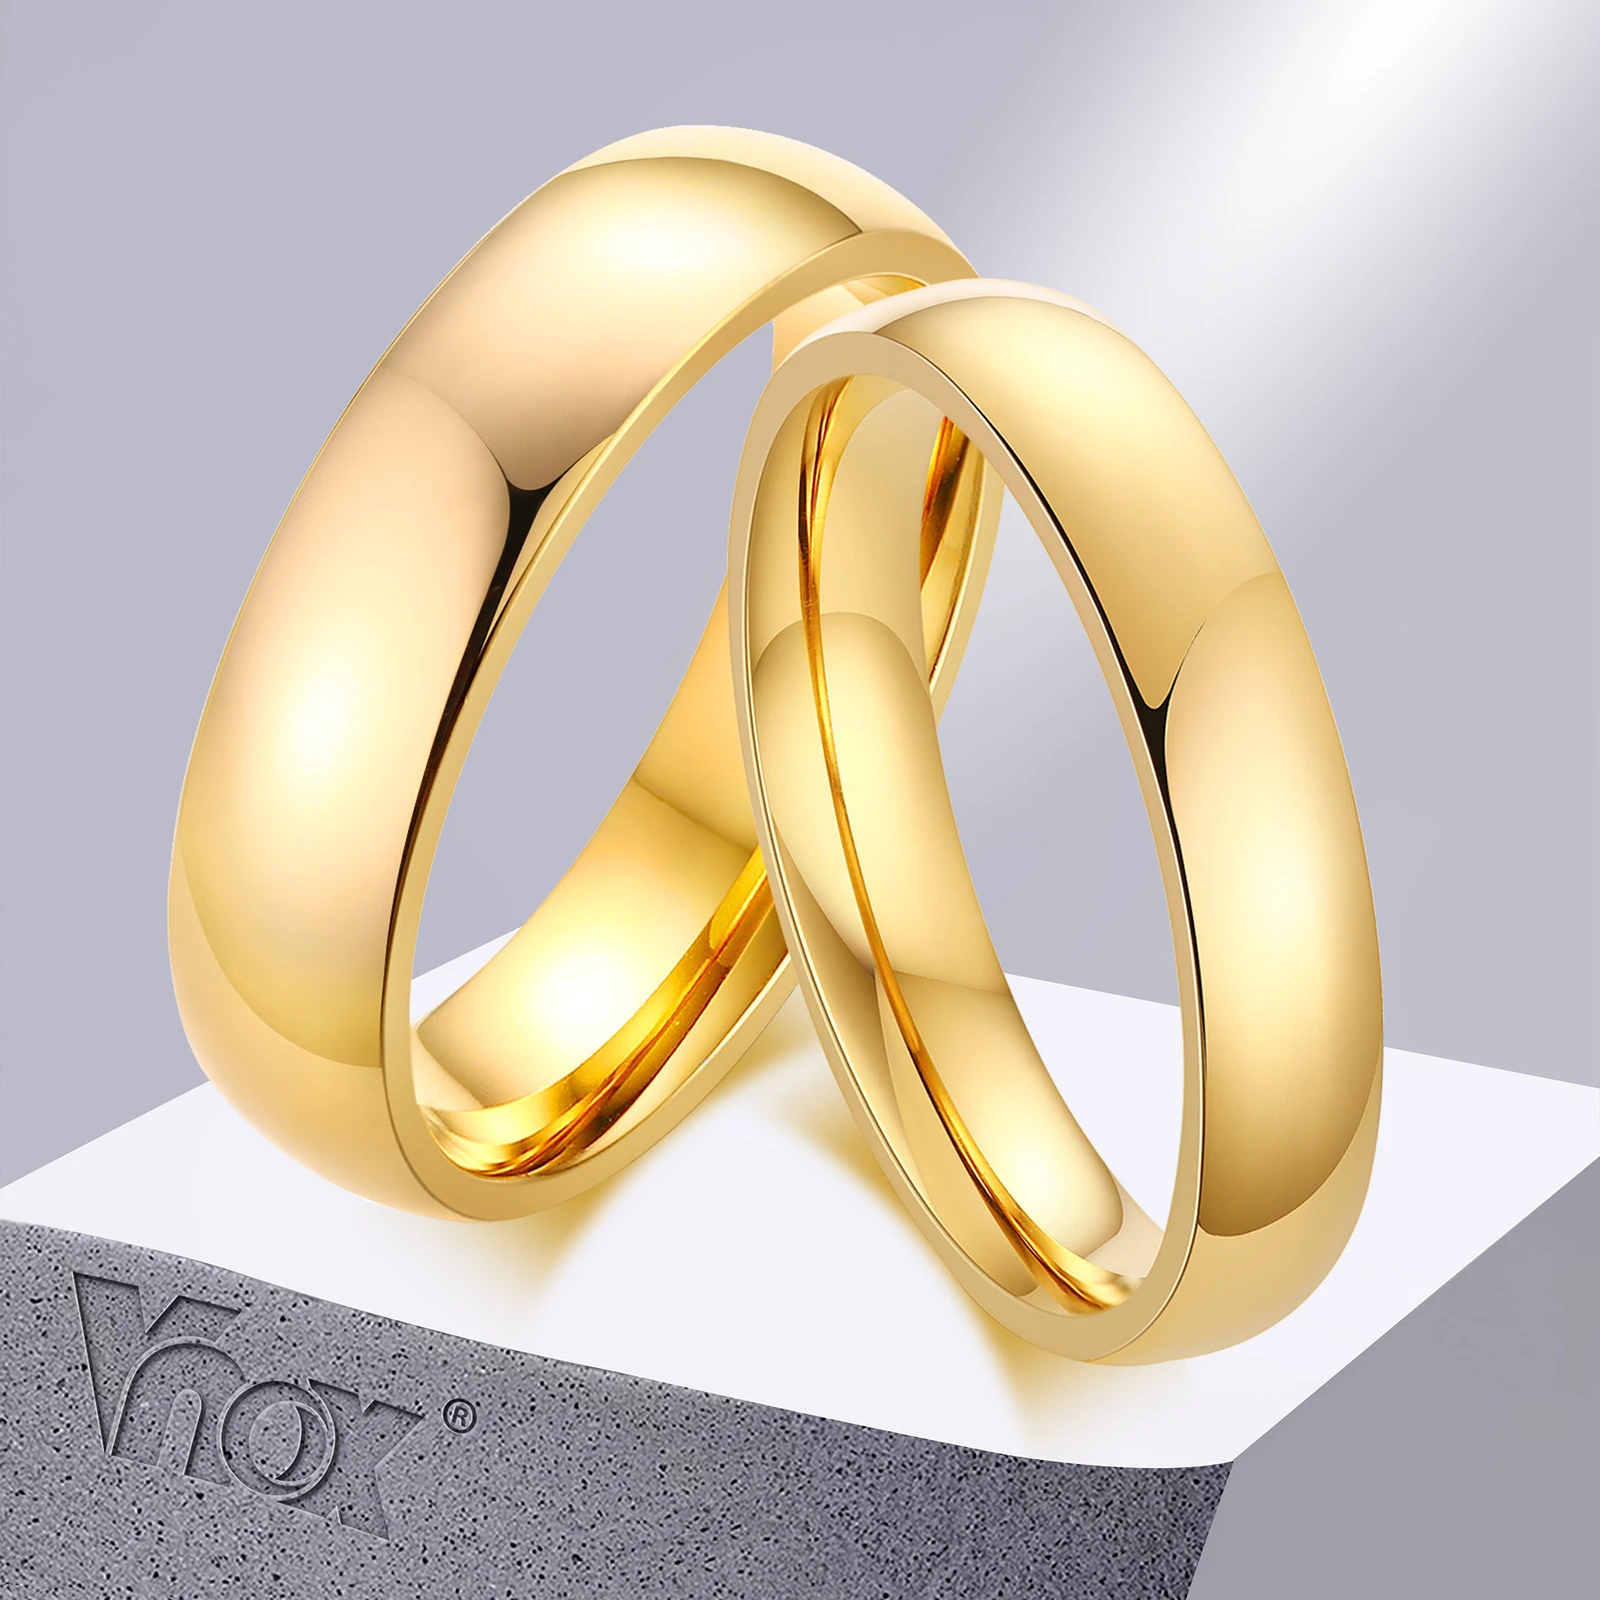 Vnox Anti Scratch Tungsten Wedding Rings for Women Men Simple Classic Wedding Bands for Couples Basic Jewelry